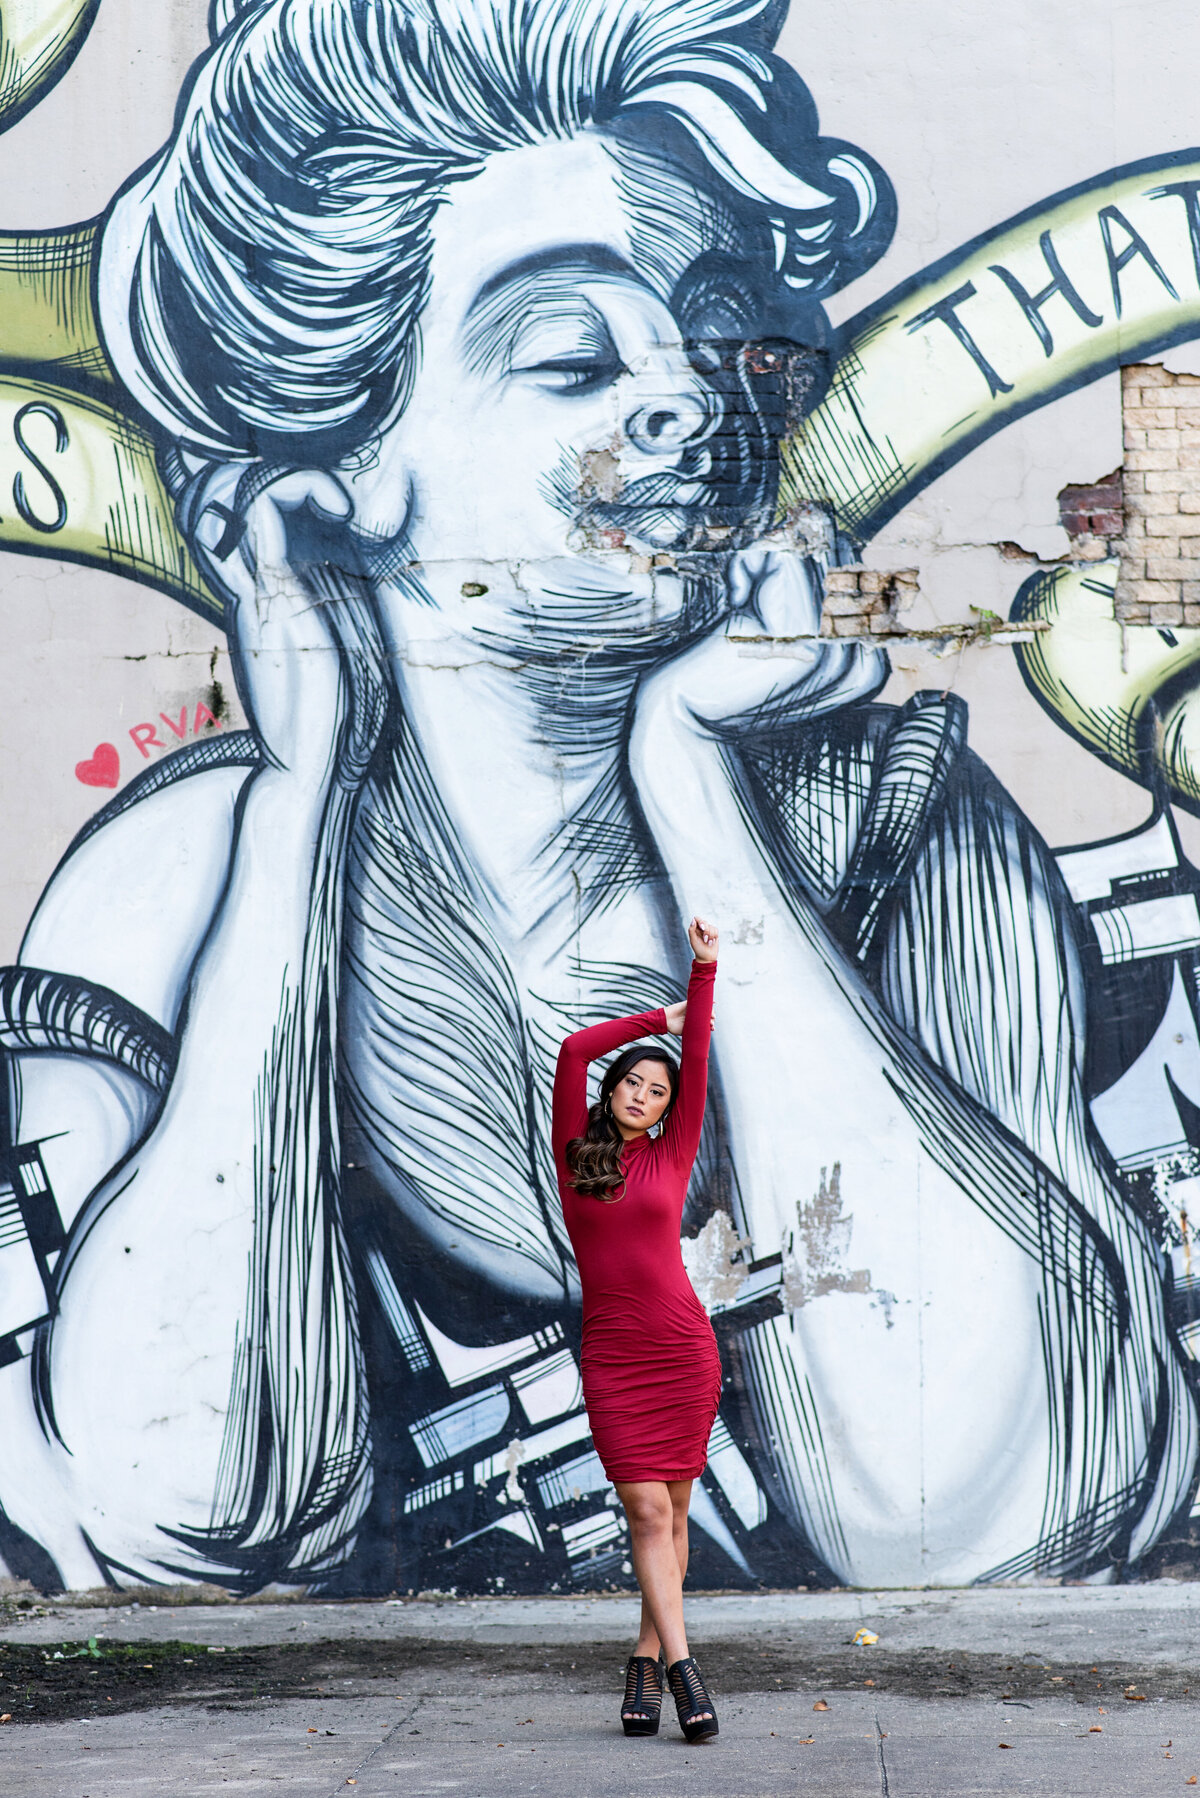 Rva senior girl wearing red dress poses in front of murals.